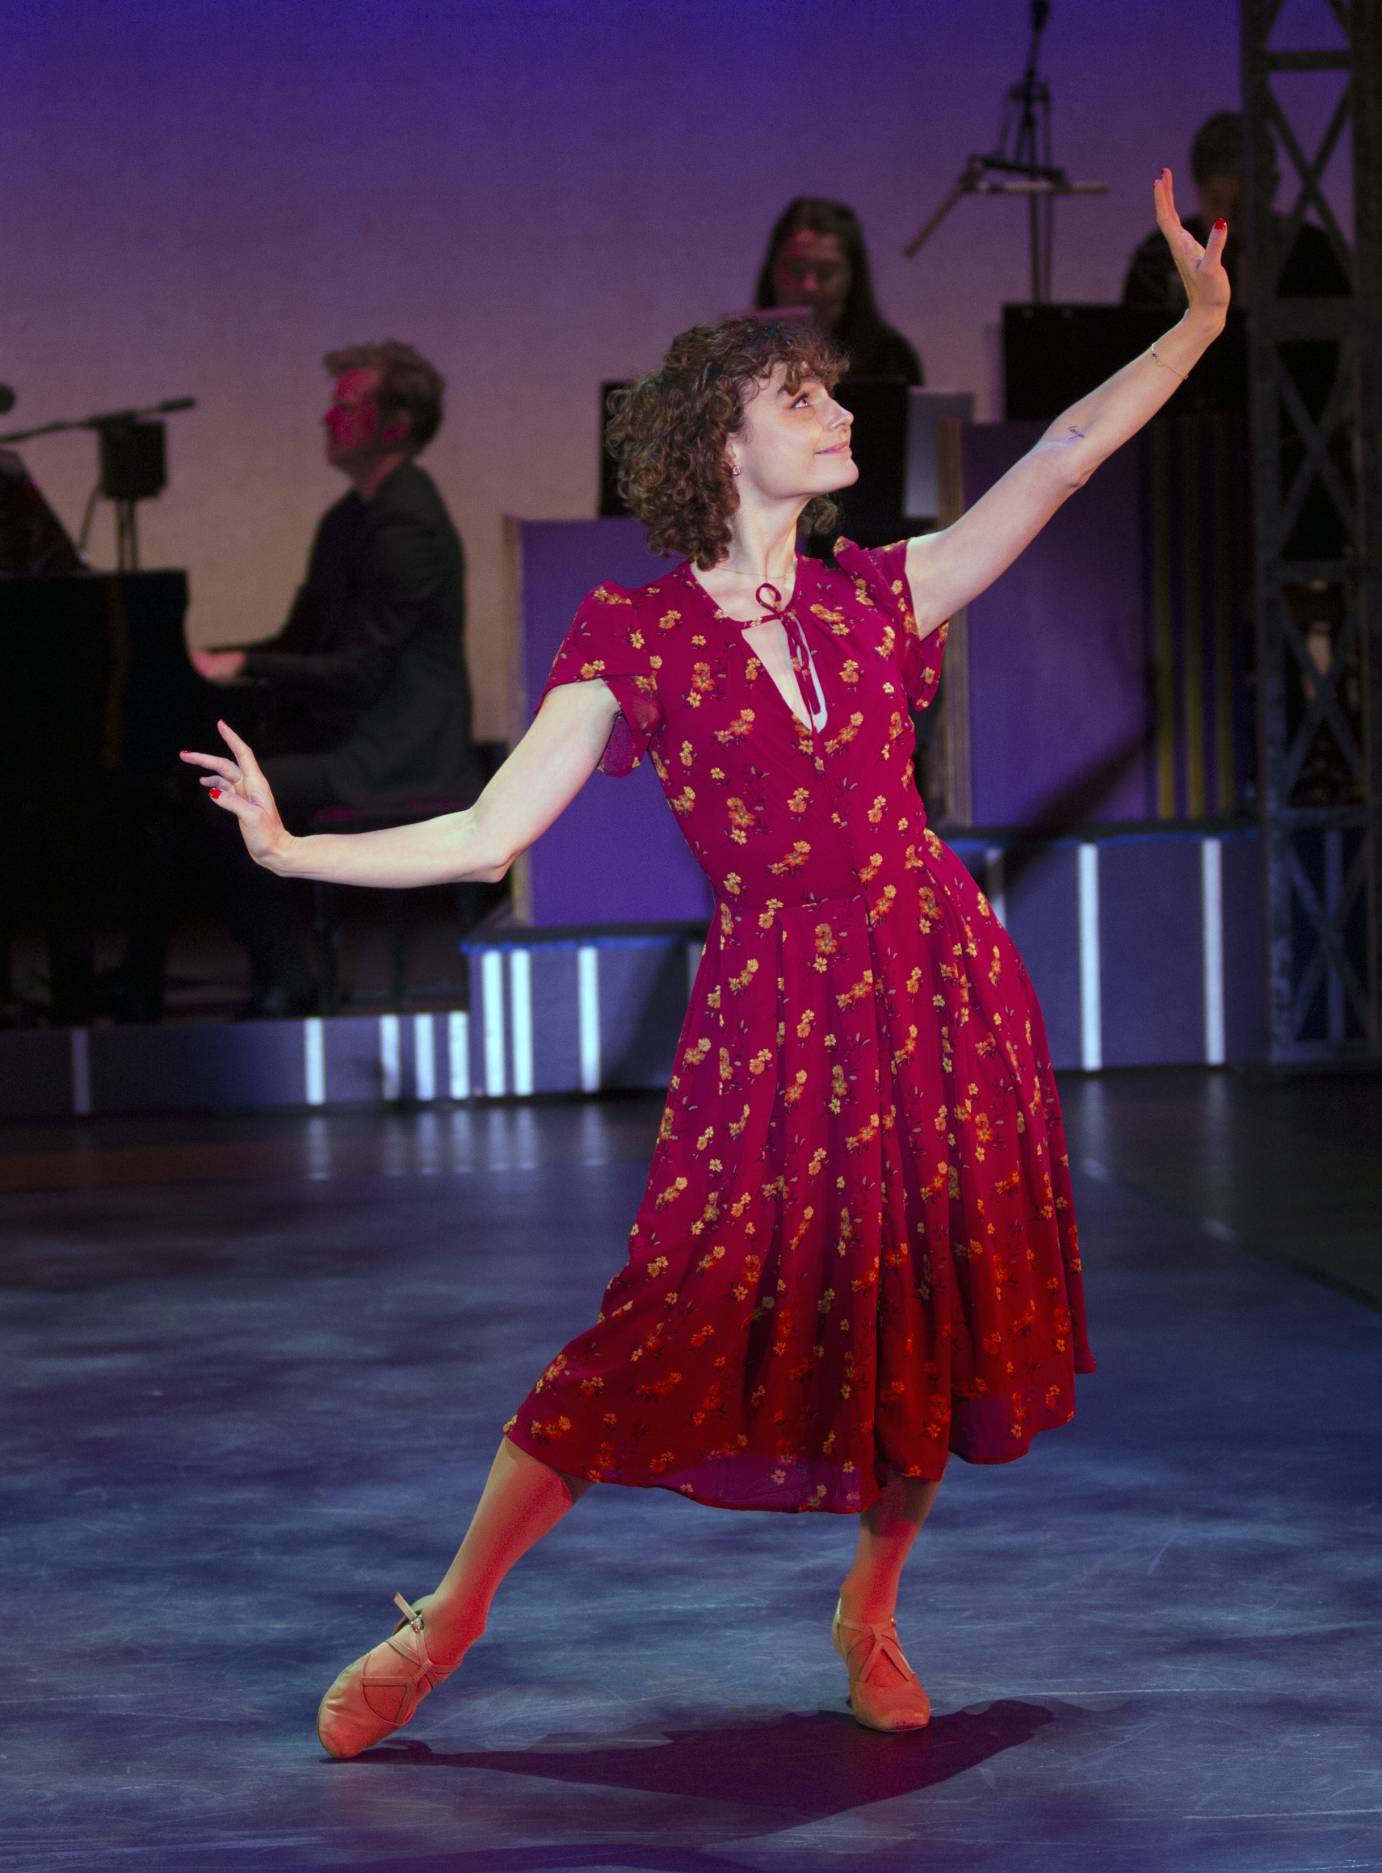 In a long maroon-printed dress, Melanie Moore holds her arms to the side, bent at the elbows and the wrists. She gazes upward to her extended arm, smiling slightly.